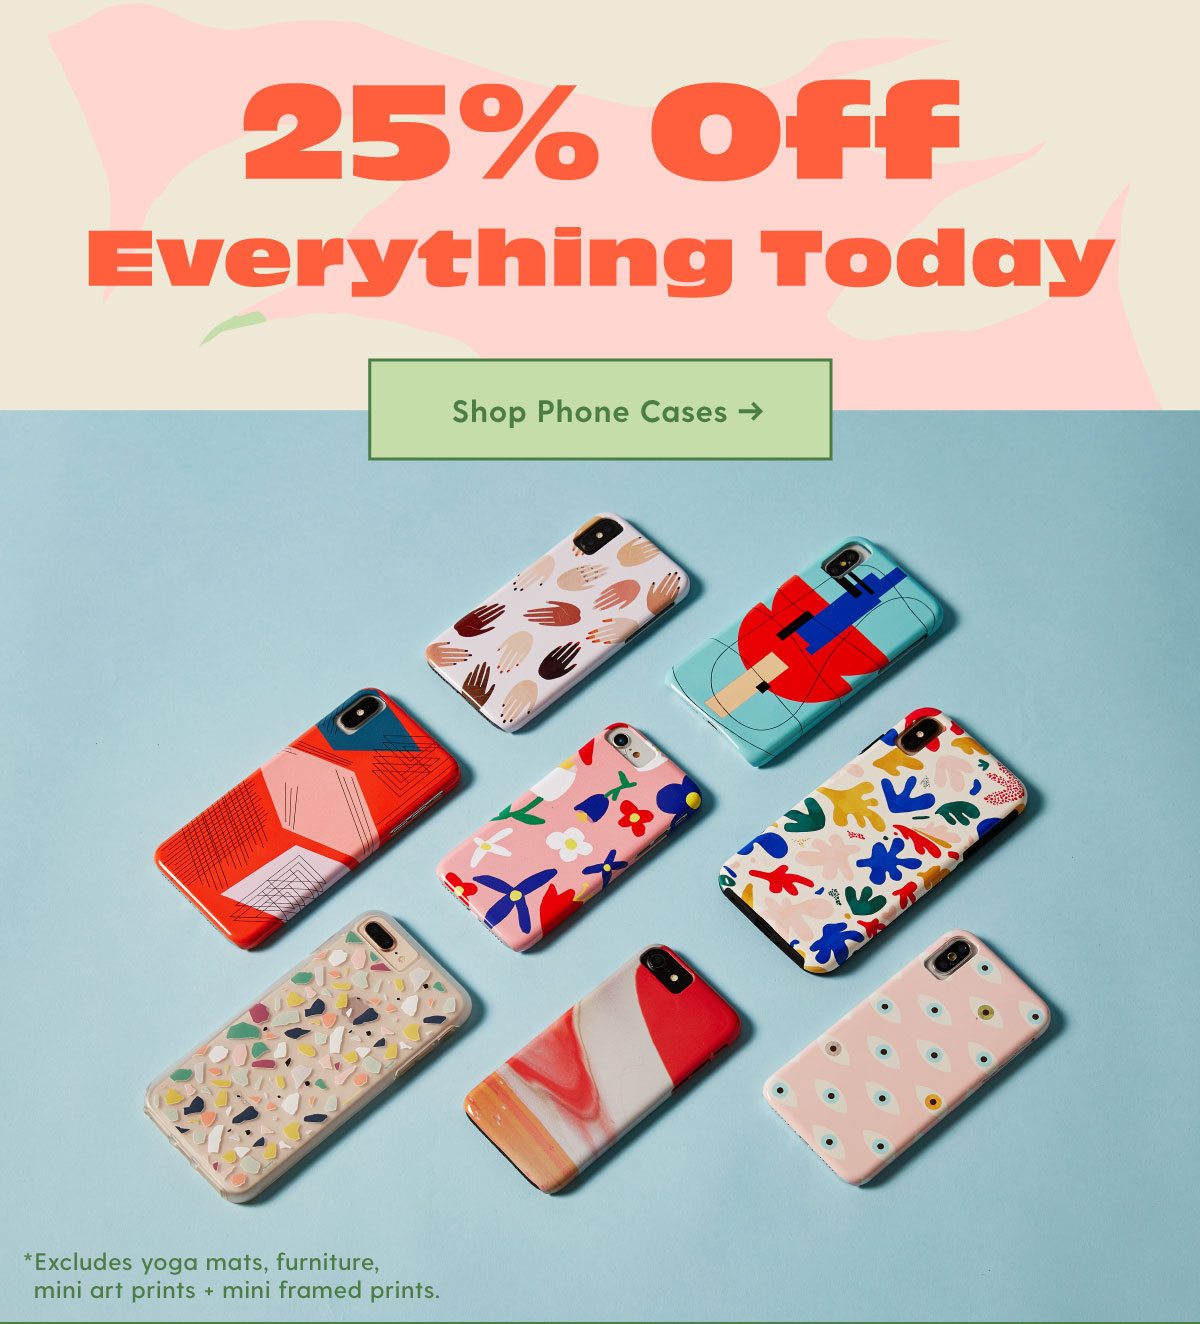  25% Off Everything Today *Excludes yoga mats, furniture, mini art prints + mini framed prints. Shop Phone Cases > >